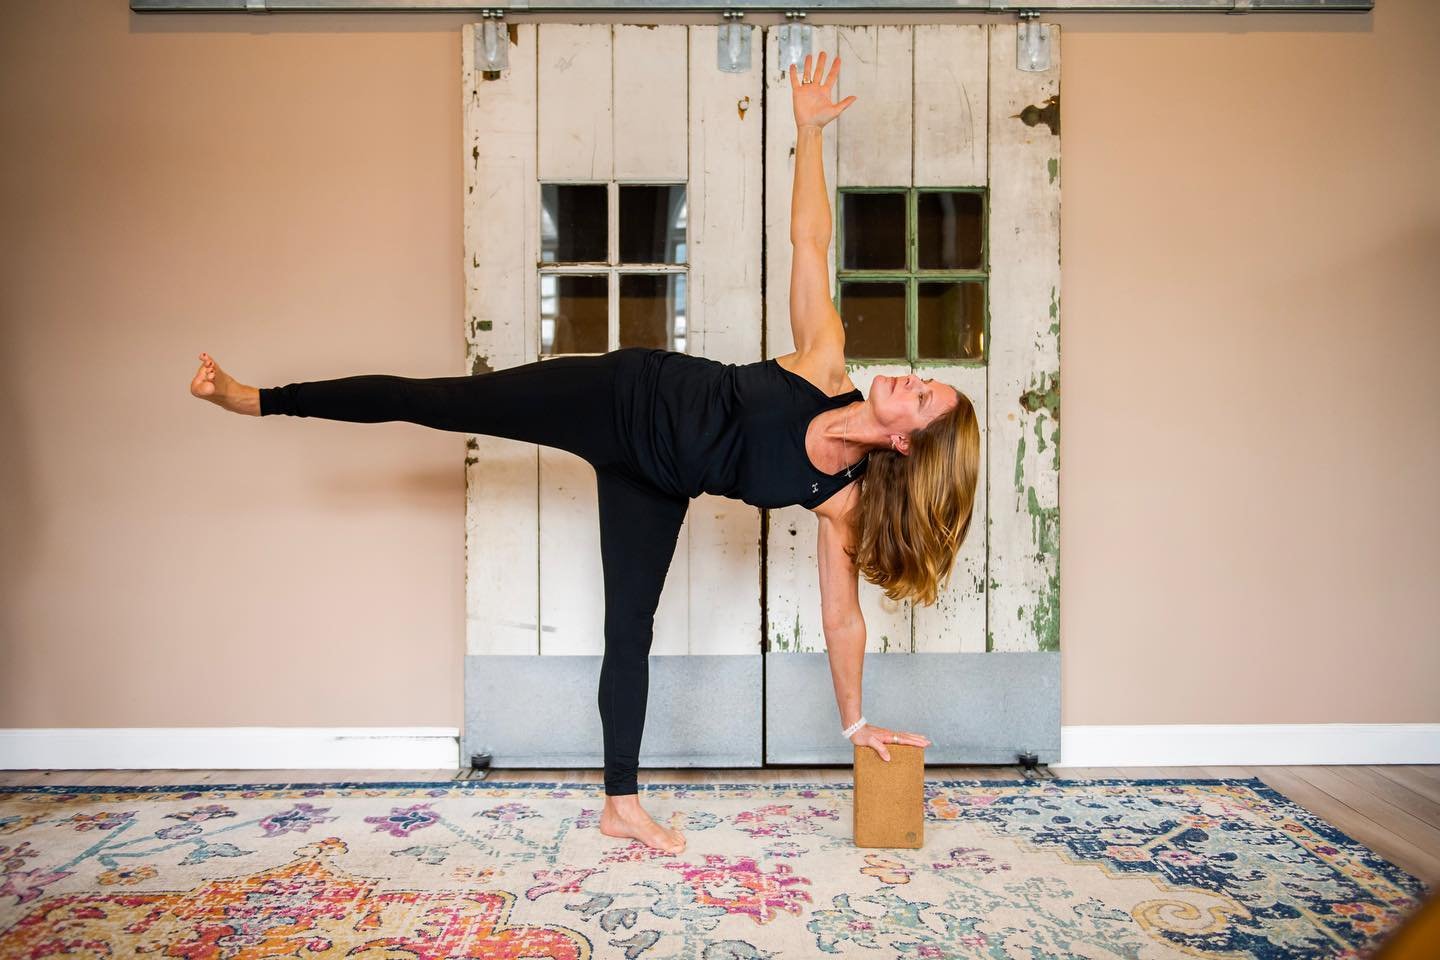 Half moon
Ardha Chandrasana (are-dah chan-DRAHS-anna)

&bull; Start in Utthita Trikonasana (Extended Triangle) with your left foot forward.
&bull; Bring your right hand to your hip and turn your head to look at the floor.
&bull; Bend your front leg a